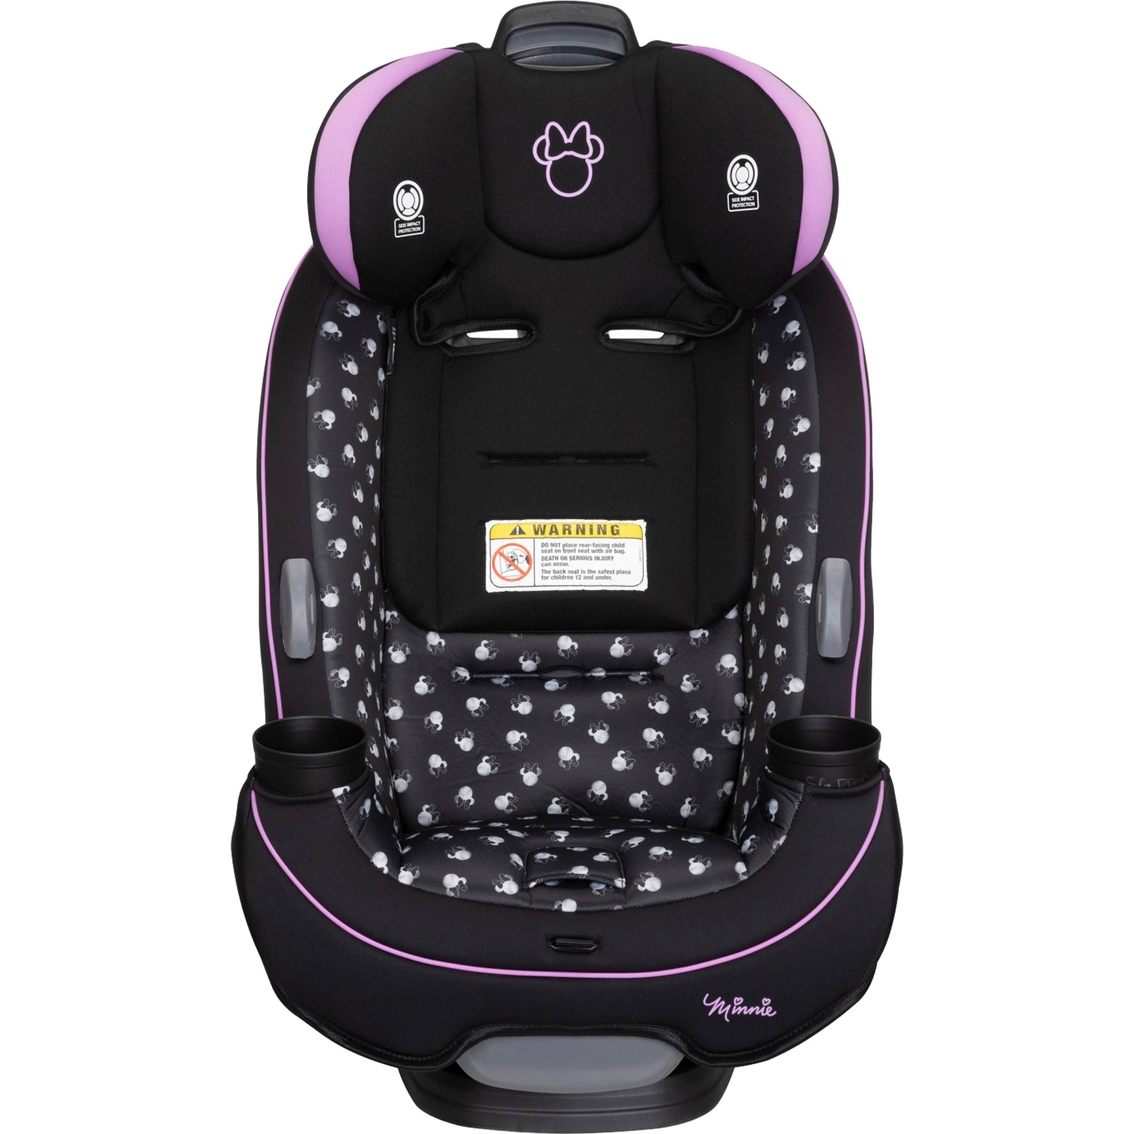 Disney Baby Grow and Go All in One Convertible Car Seat - Image 6 of 10